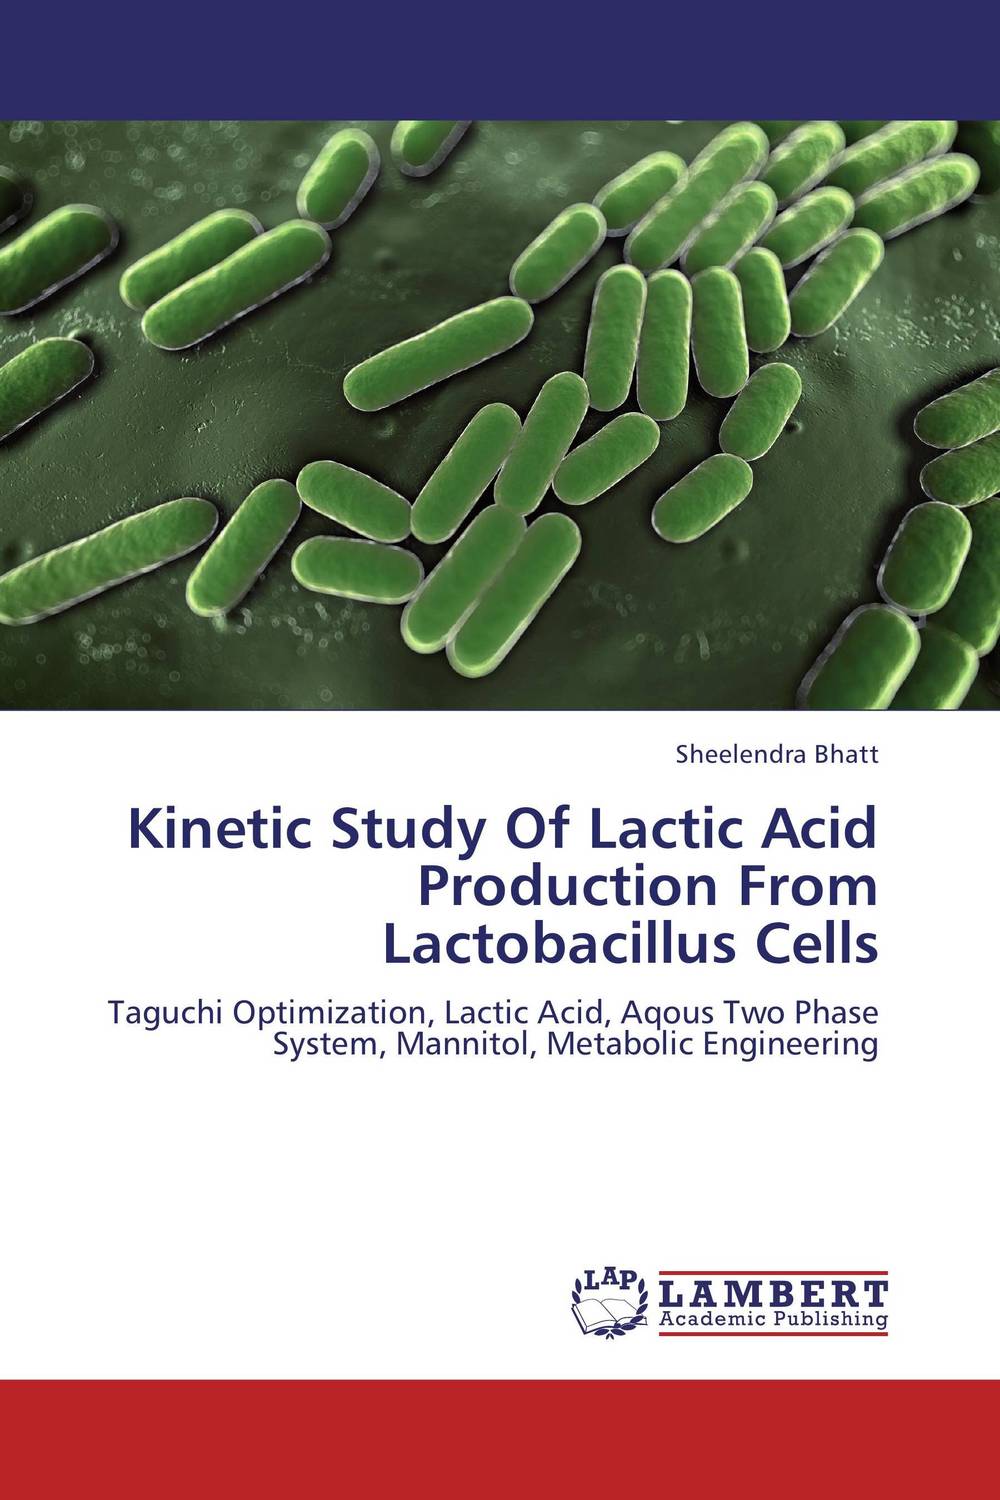 Kinetic Study Of Lactic Acid Production From Lactobacillus Cells